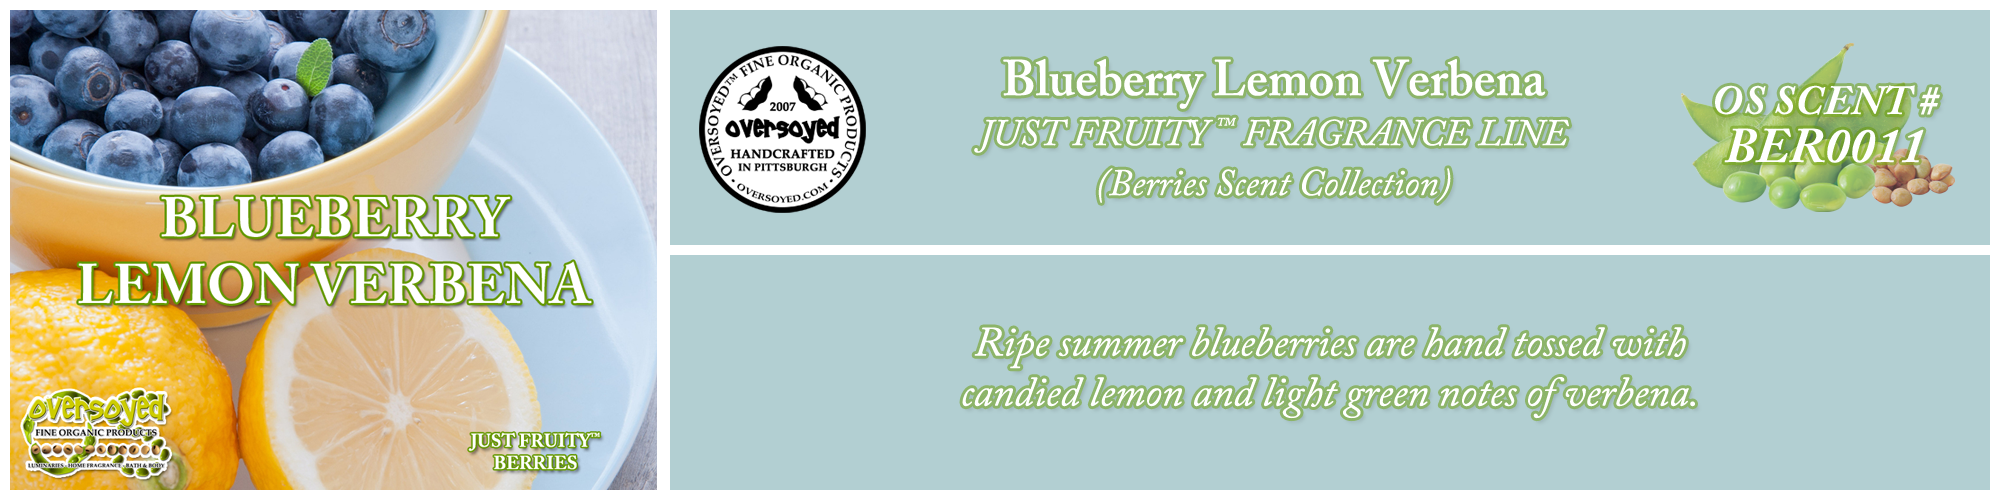 Blueberry Lemon Verbena Handcrafted Products Collection